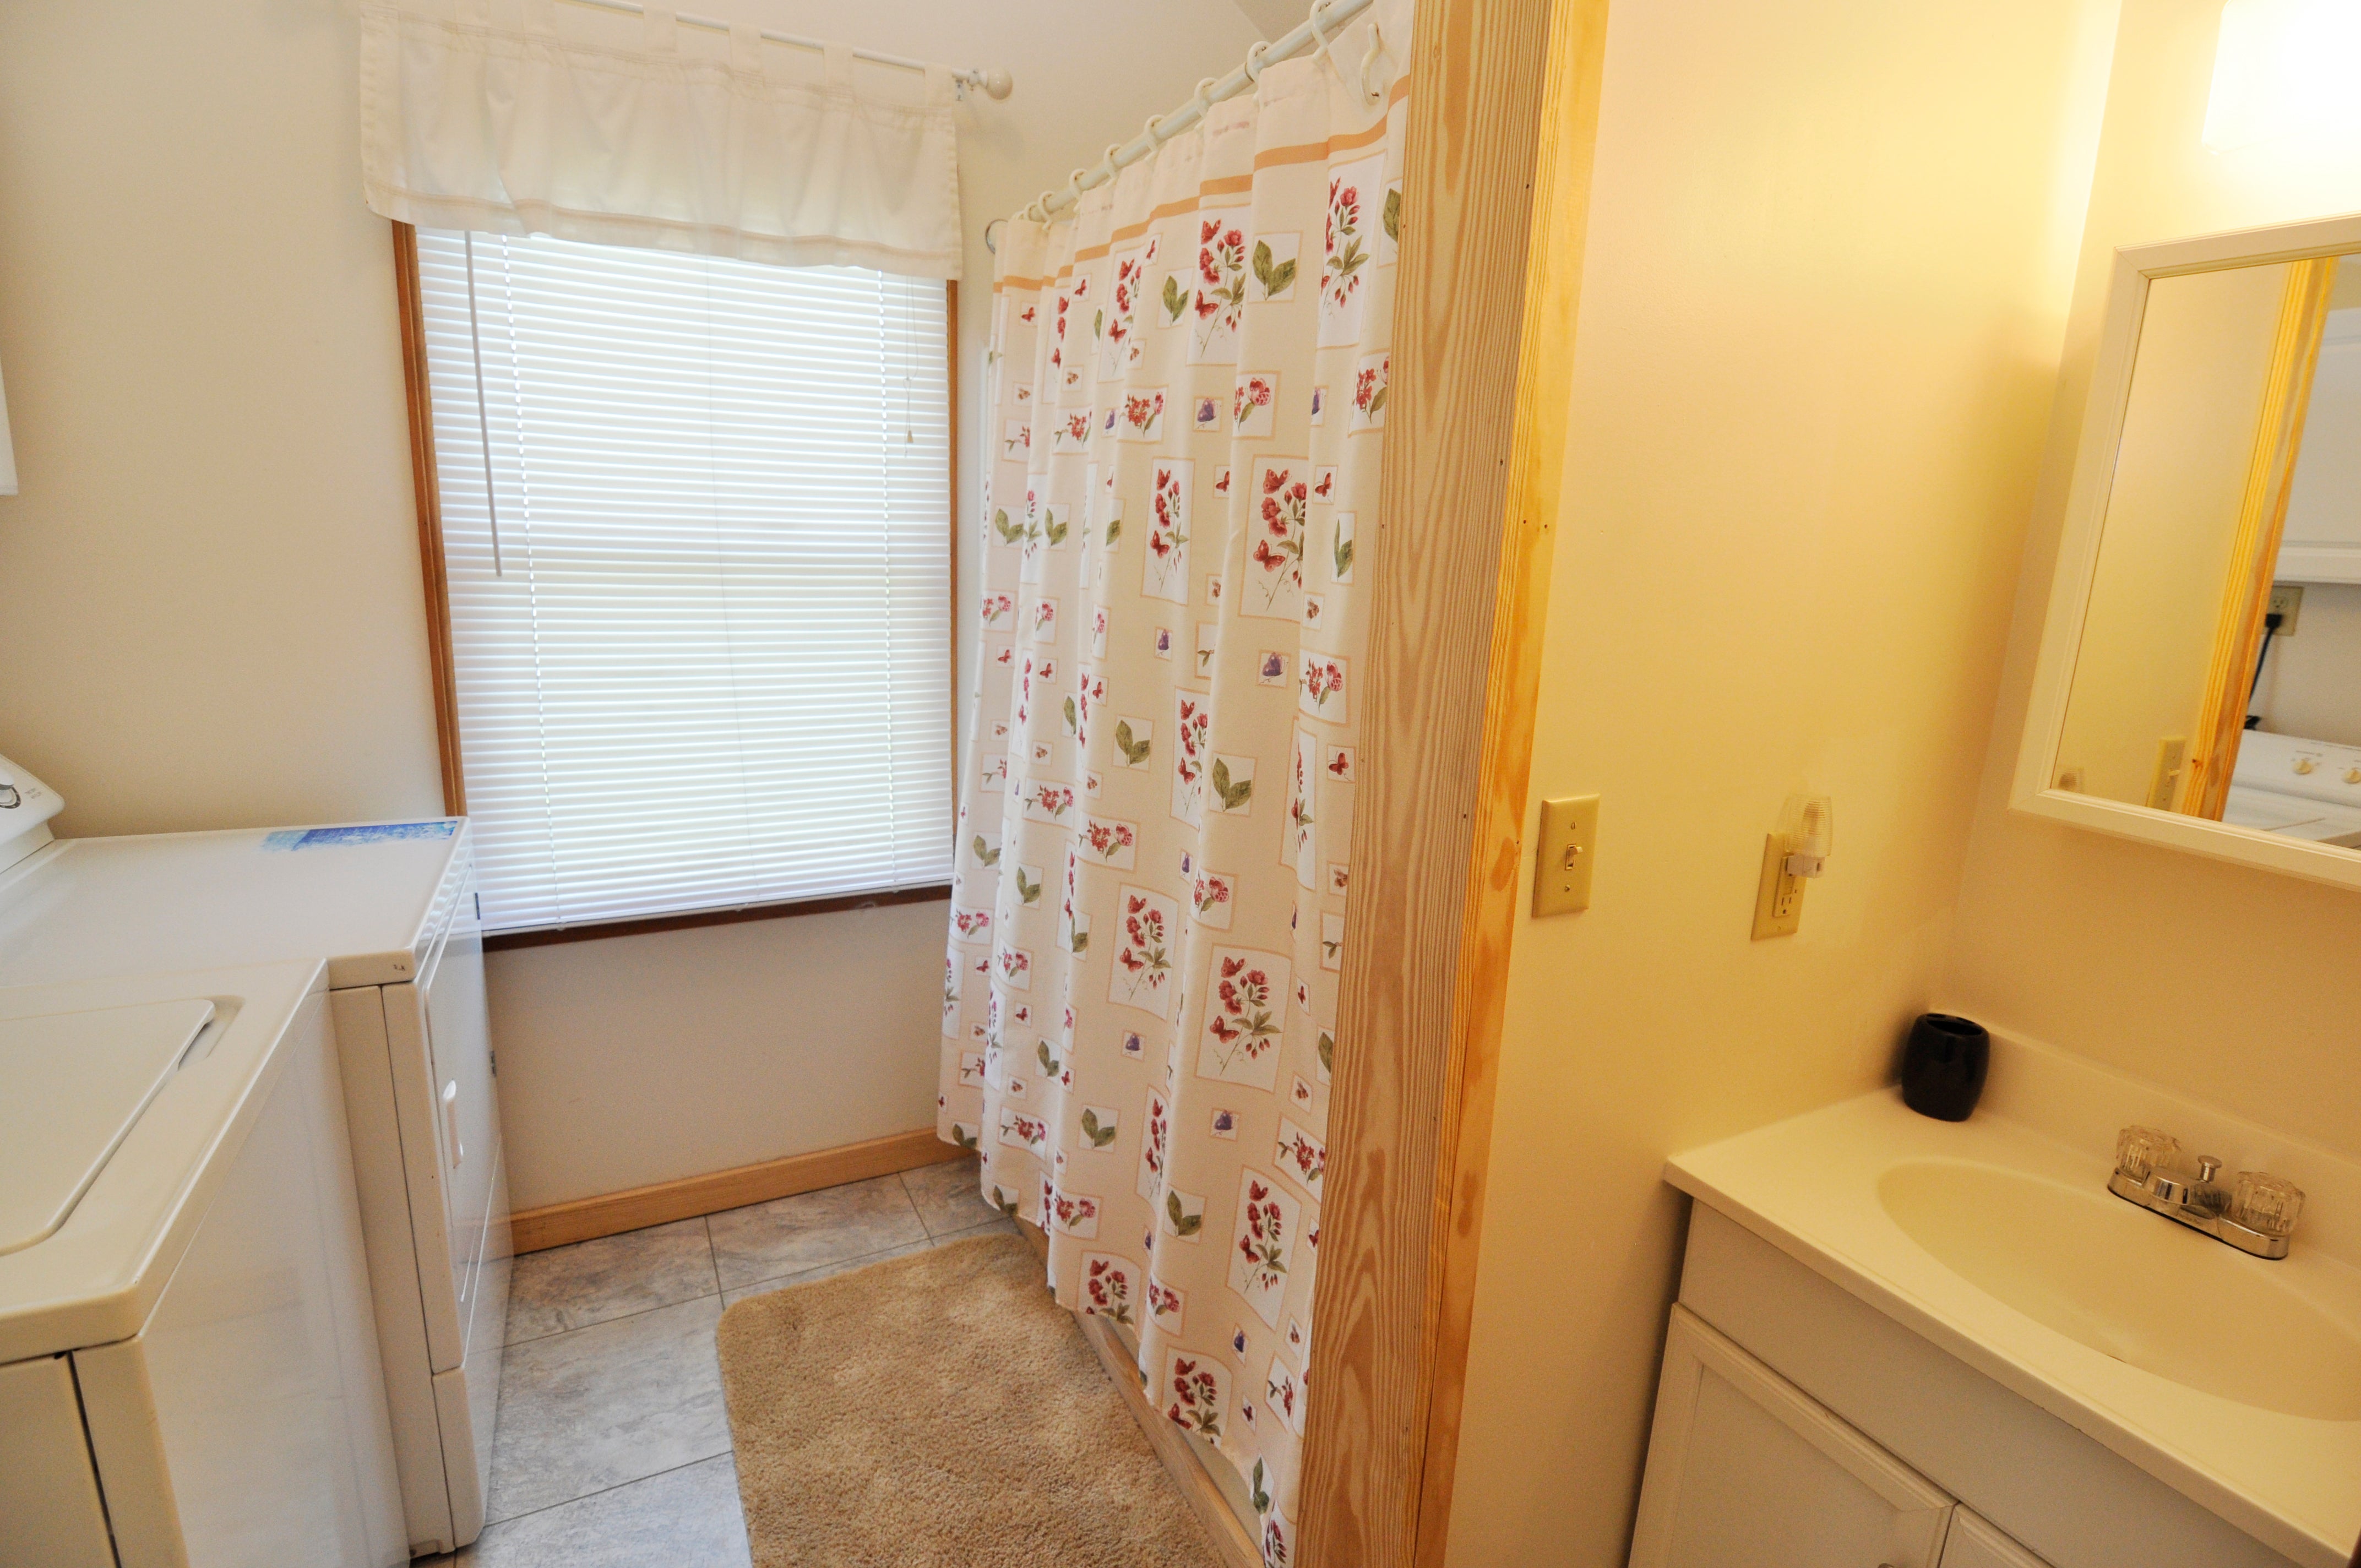 Bath with TubShower, Washer & Dryer, Second Floor